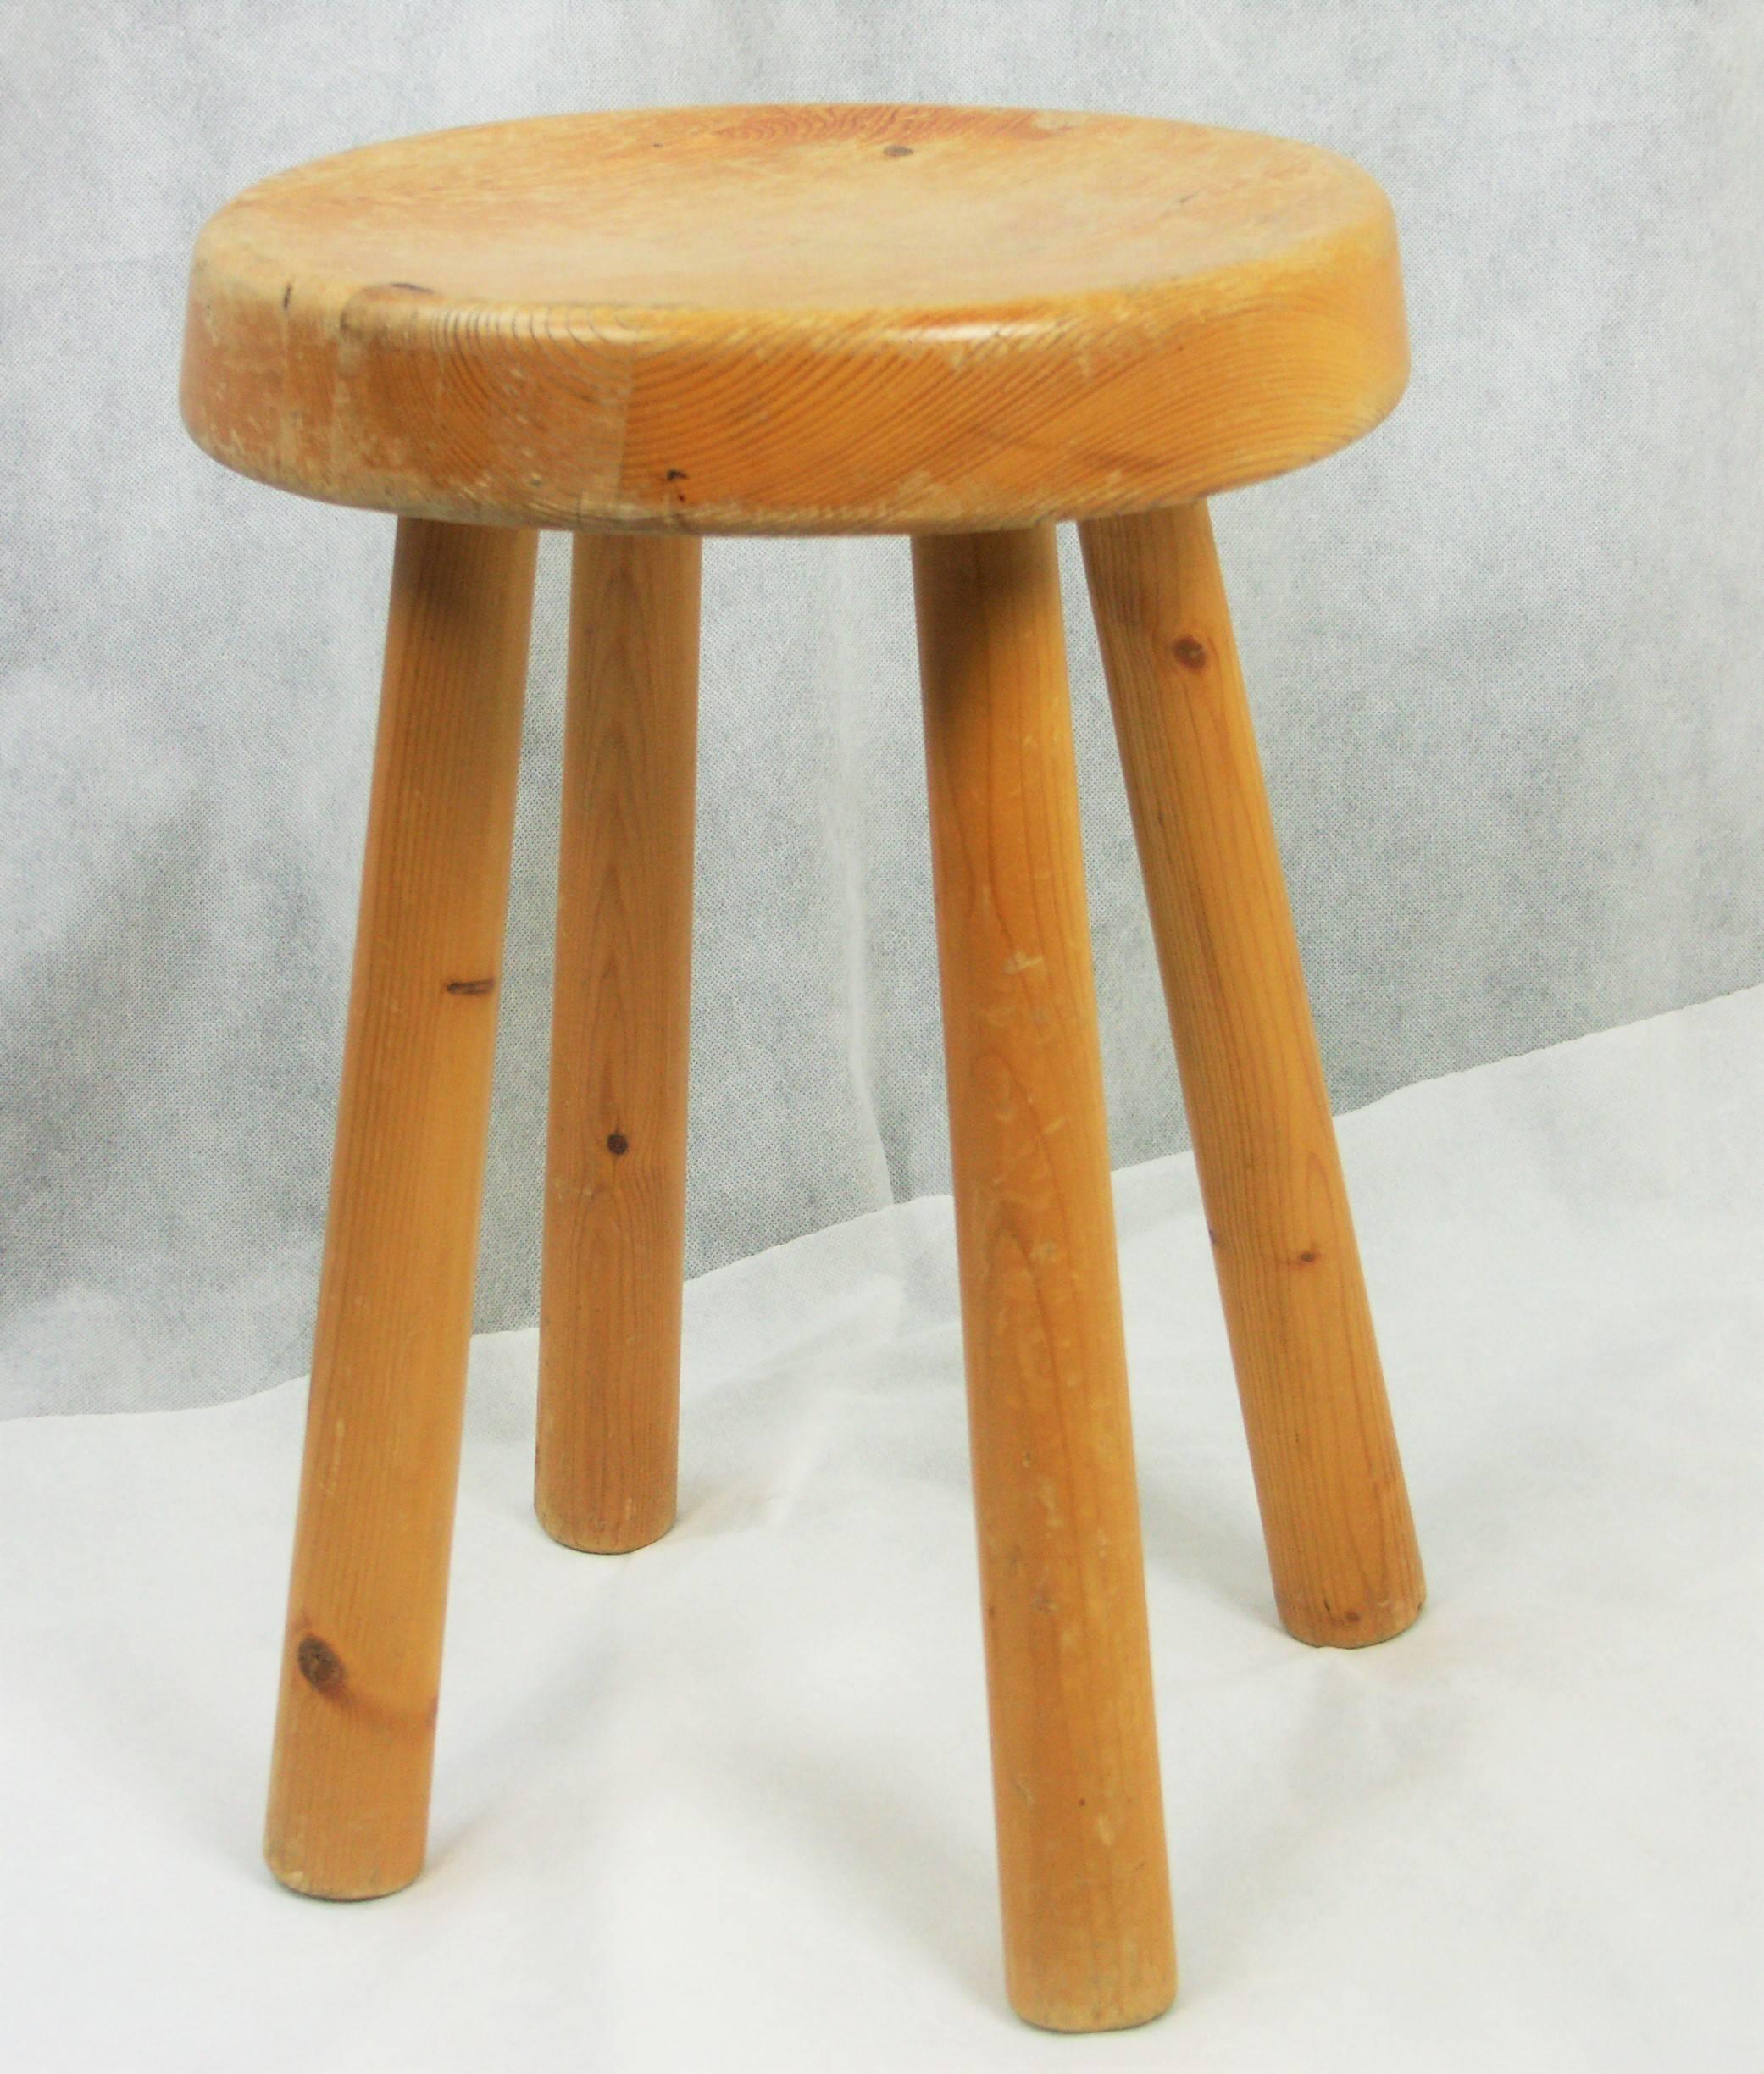 Varnished Stool by Charlotte Perriand